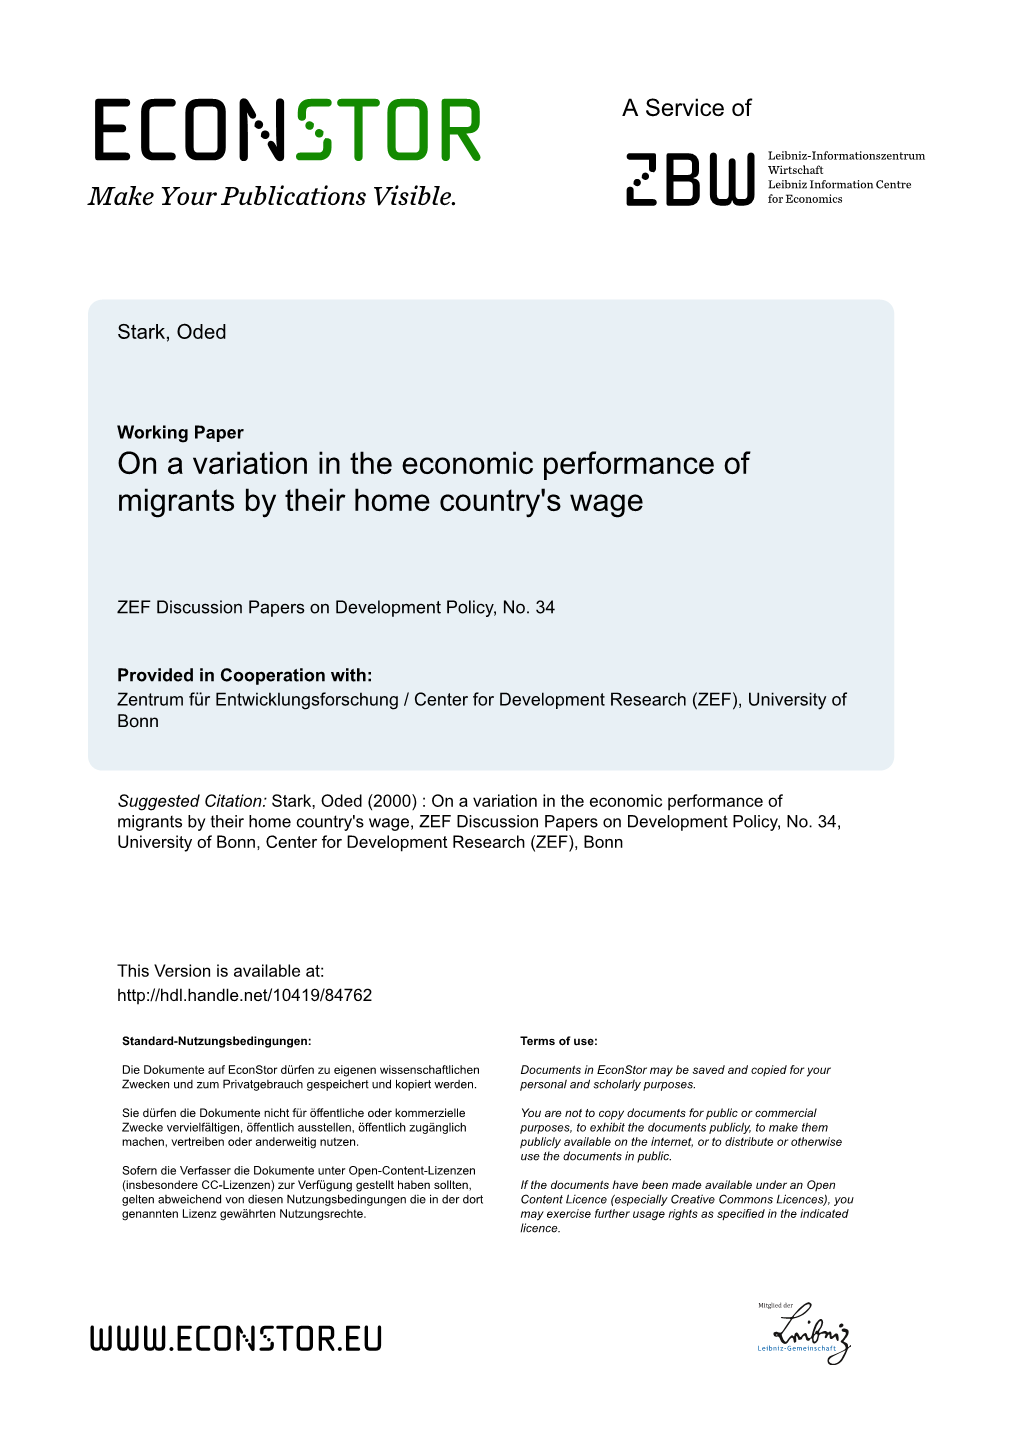 On a Variation in the Economic Performance of Migrants by Their Home Country's Wage